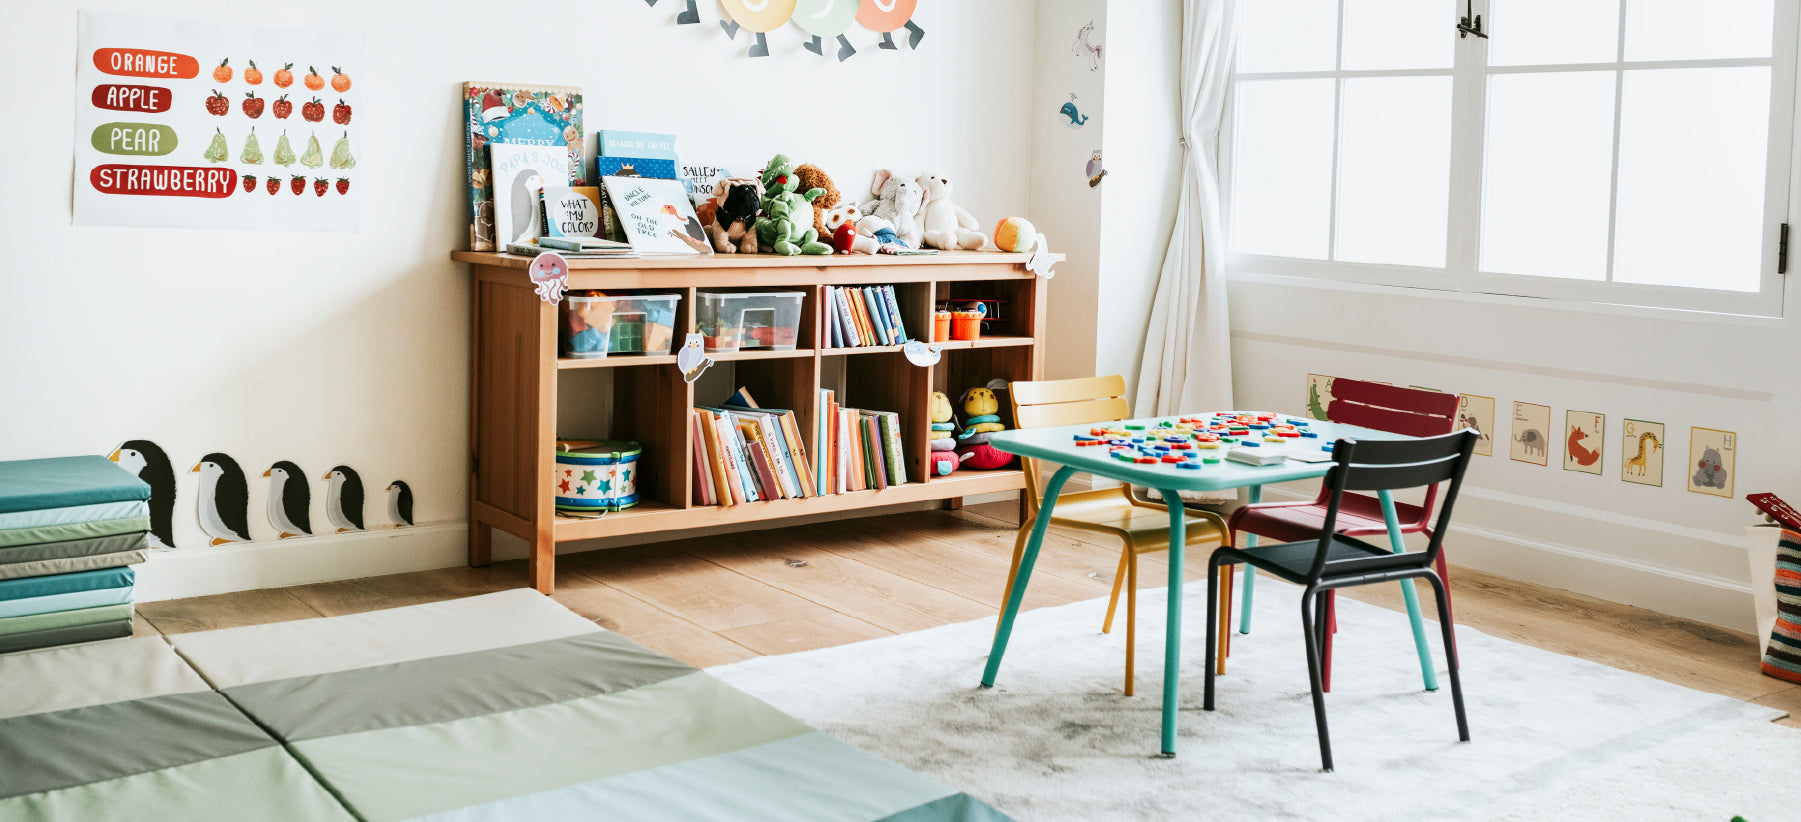 From Cleanup to Creativity: Tips for Closing and Preparing Your Early Childhood Classroom